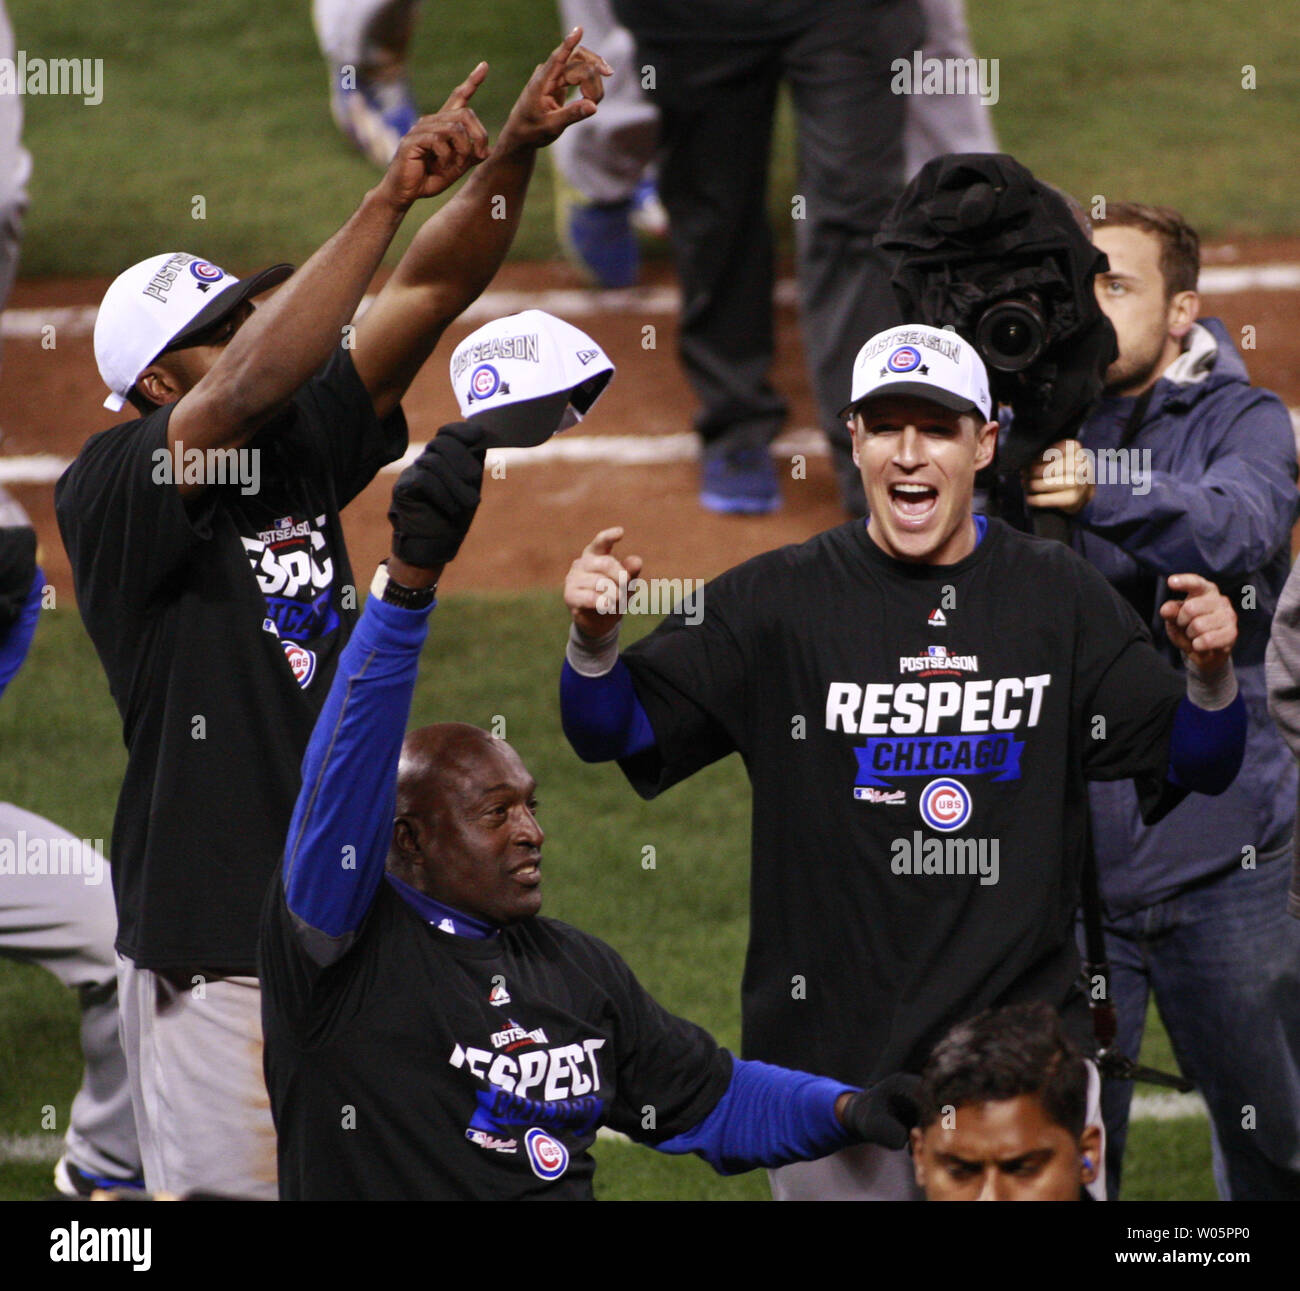 Chicago Cubs players celebrate after a come from behind victory over the San Francisco Giants in Game 4 of the National League Division Series at AT&T Park in San Francisco on October 11, 2016. The Cubs defeated the Giants 6-5 to win the NLDS.       Photo by Bruce Gordon/UPI Stock Photo